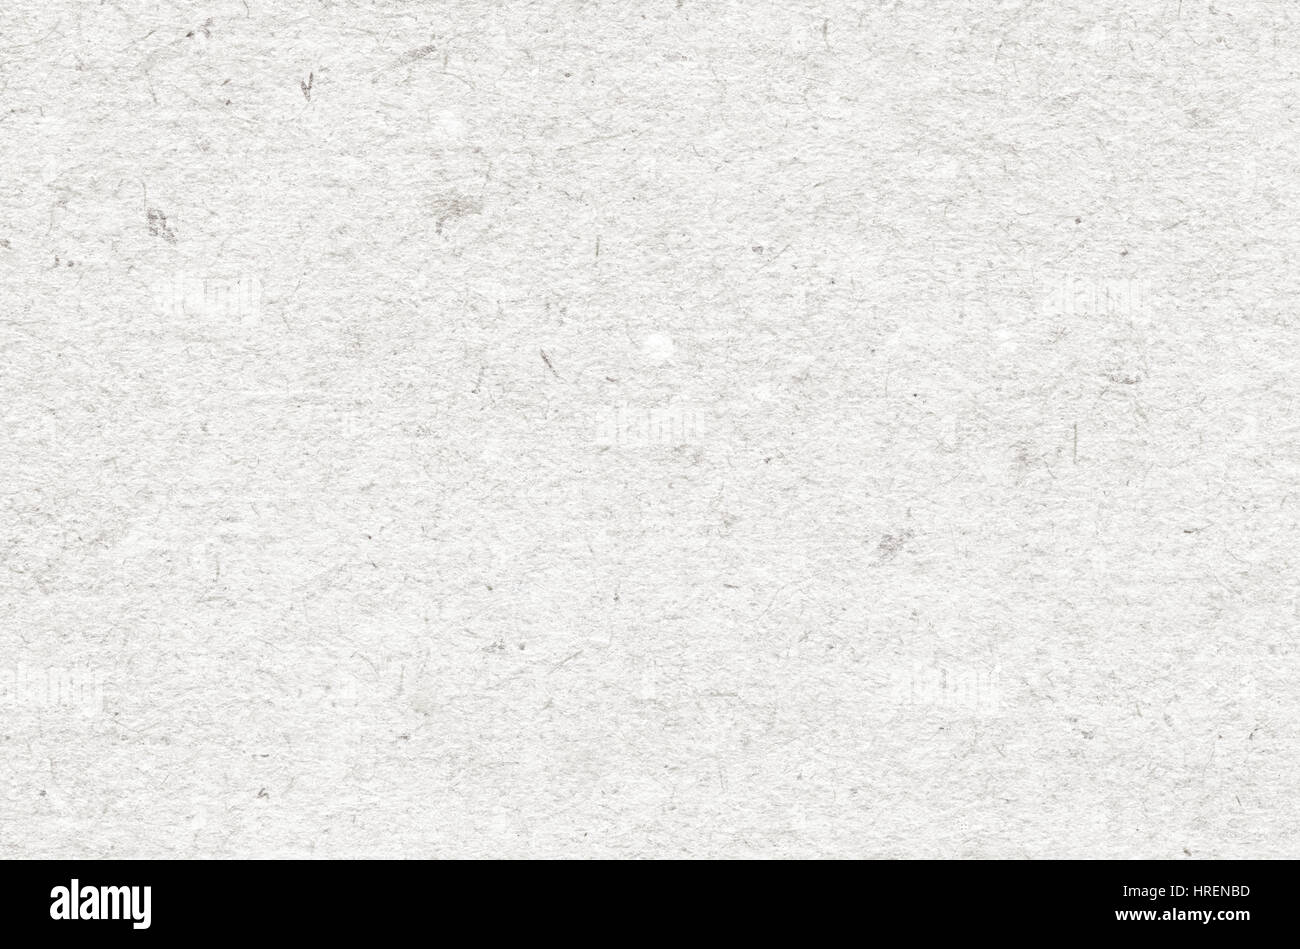 Gray recycled horizontal note paper texture, light background Stock Photo